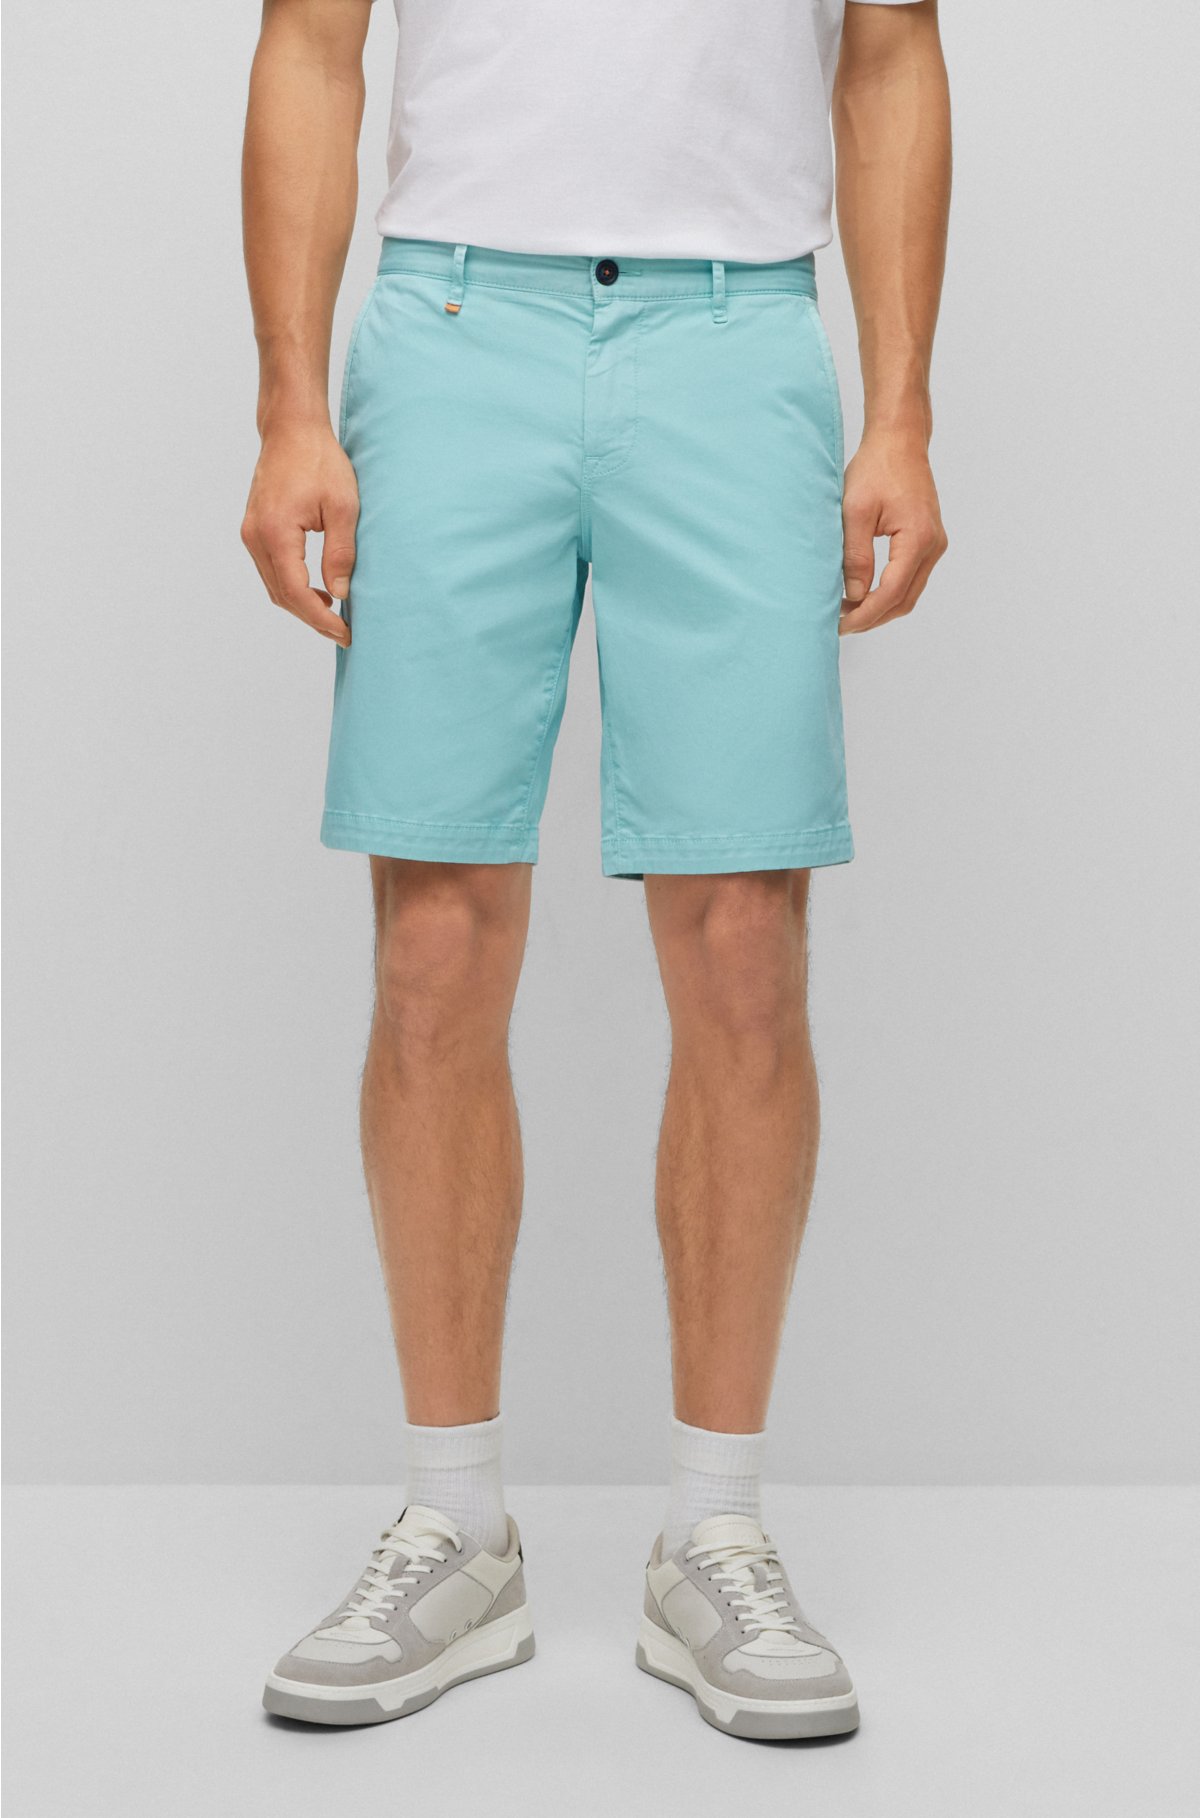 - regular-rise shorts in stretch cotton